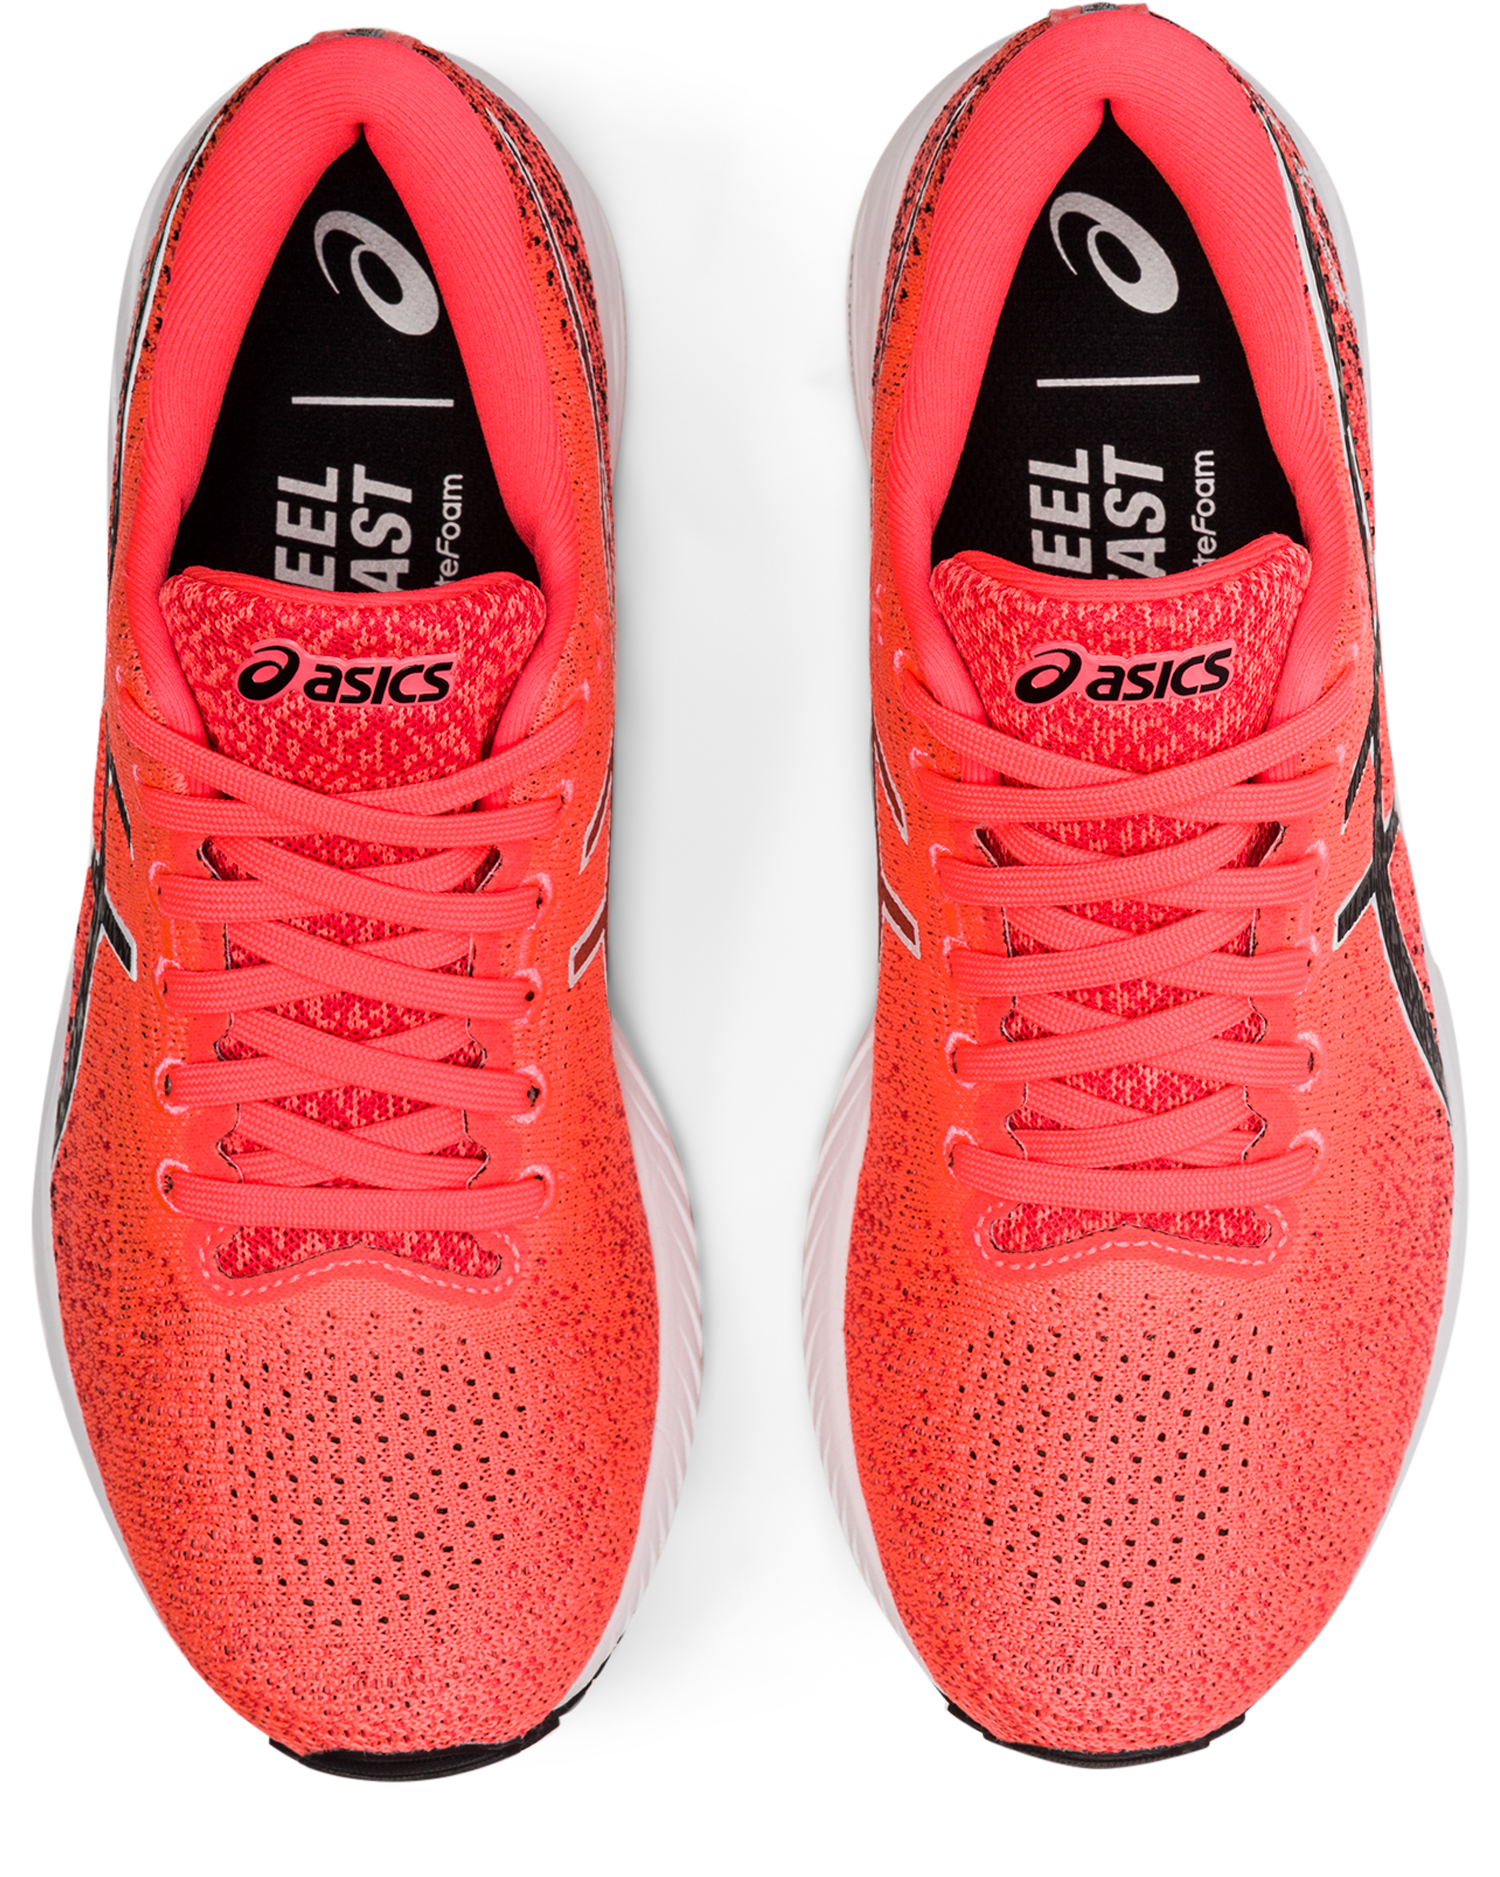 Asics Women's Gel-DS Trainer 26  Shoes in Blazing Coral/Black